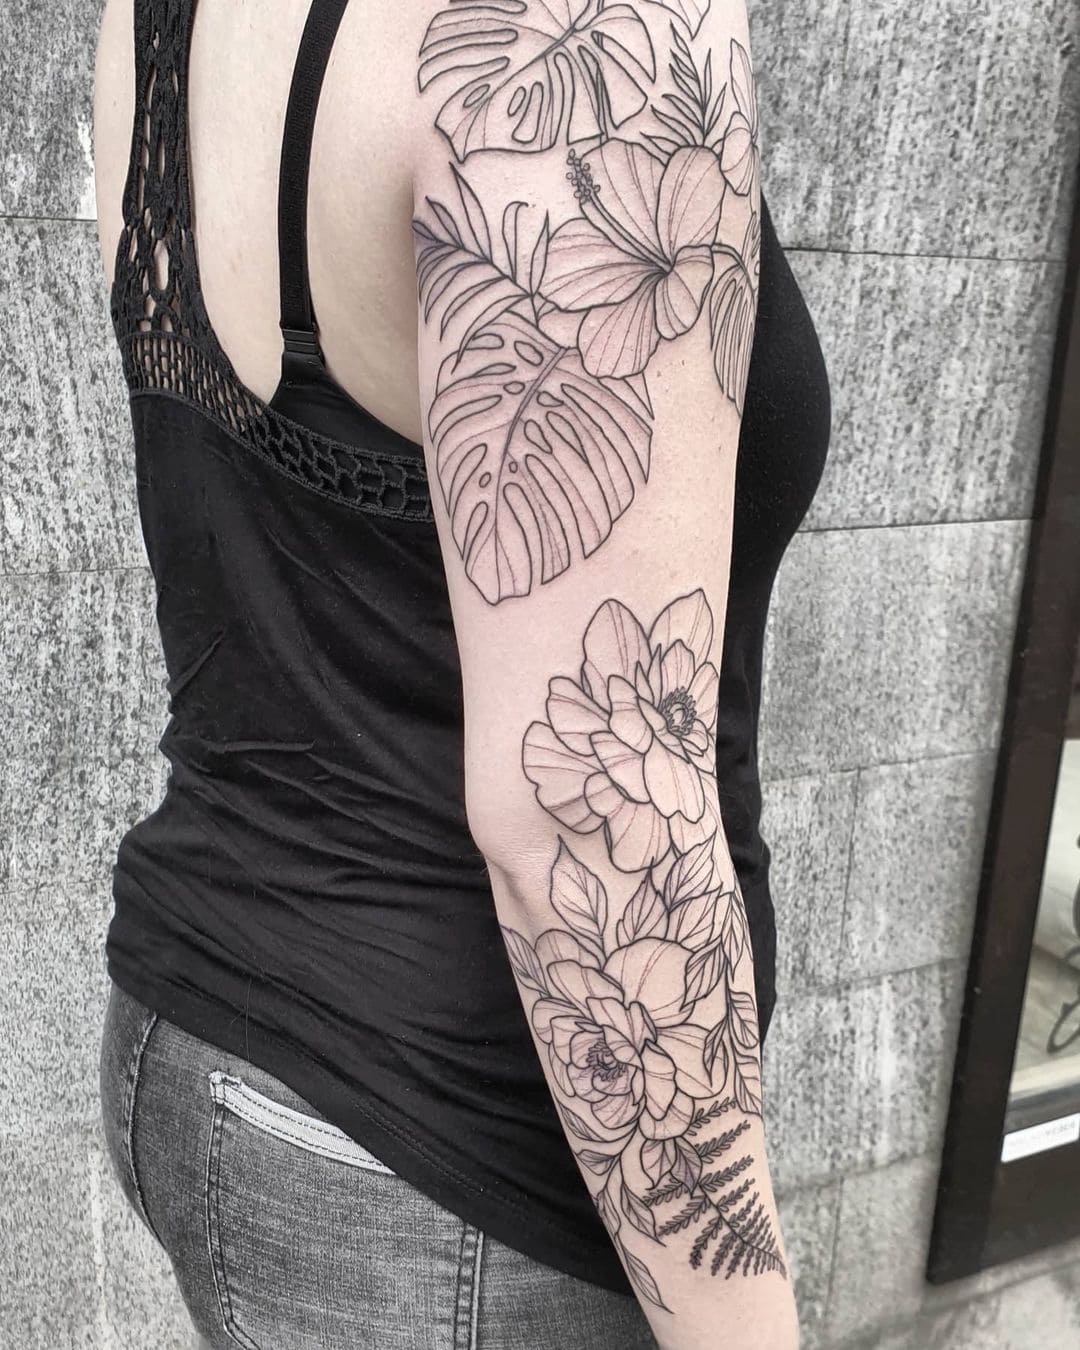 Audrey Anderson on Instagram Desert Garden for Jessica Thanks for  bringing me something new and challe  Shoulder sleeve tattoos Tattoos  Floral tattoo sleeve